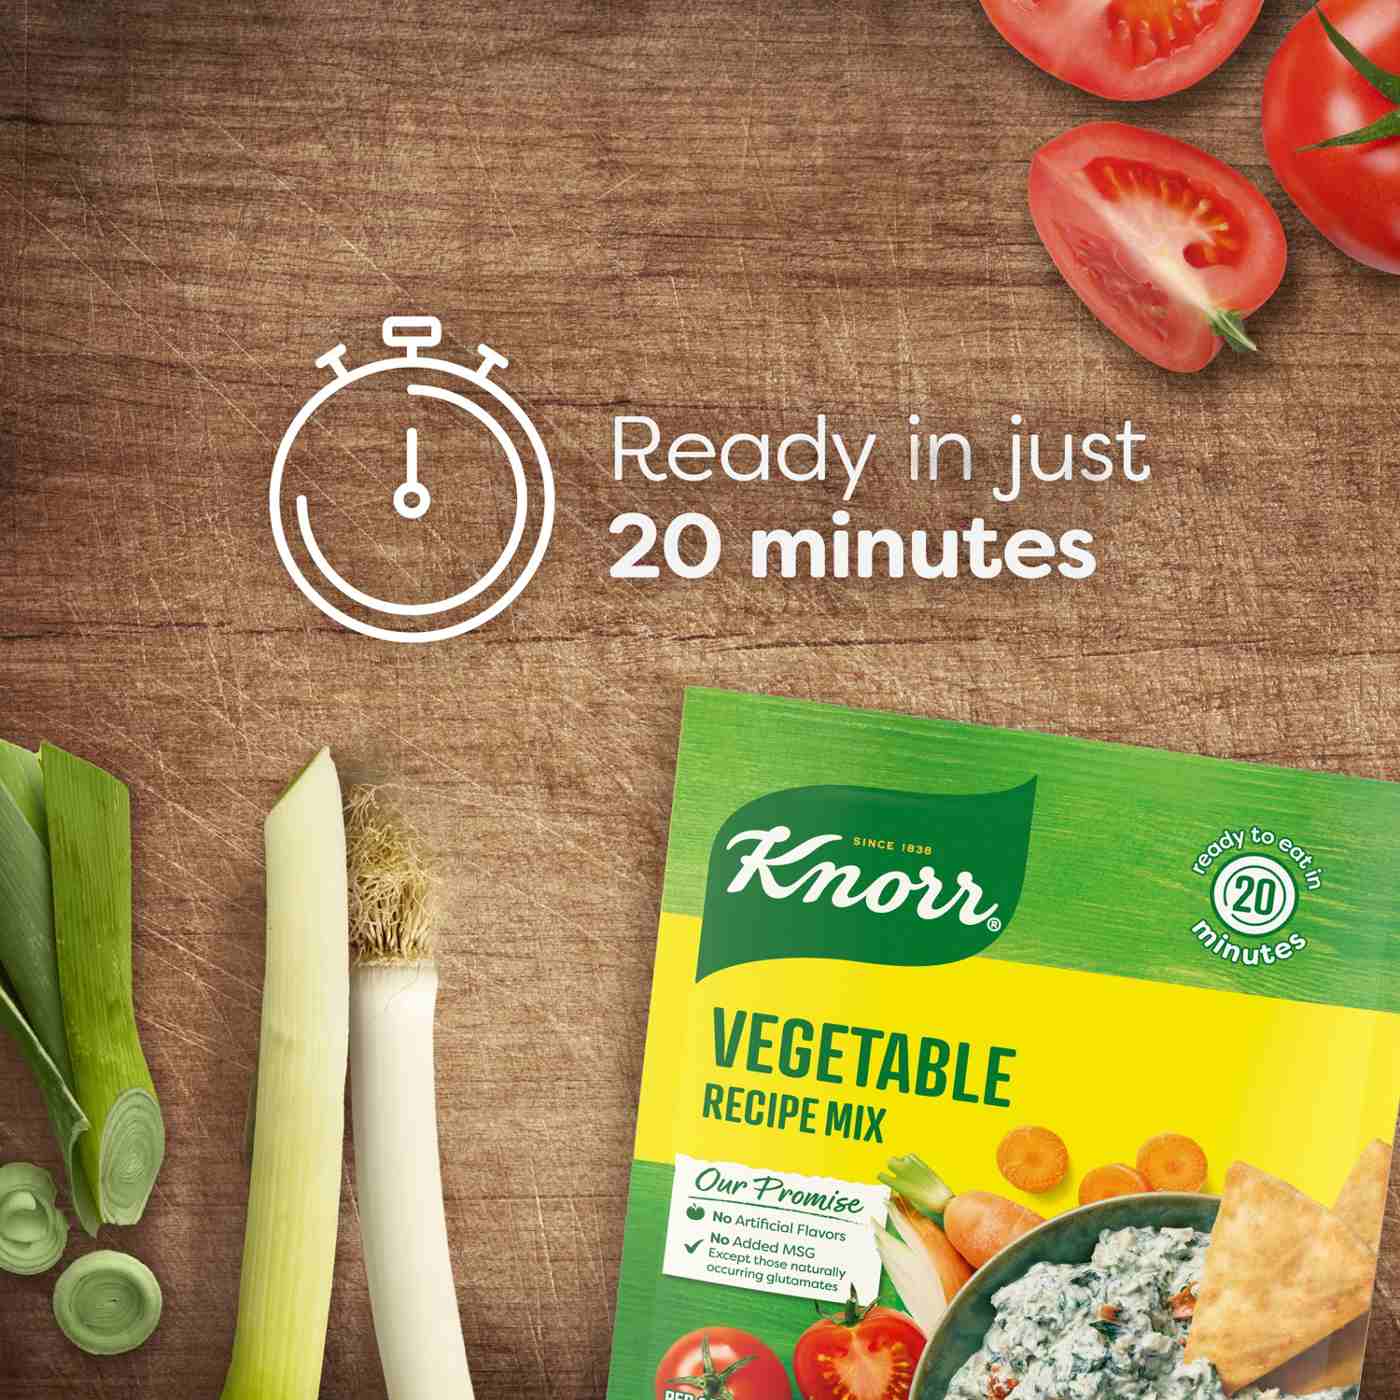 Knorr Vegetable Recipe Mix; image 5 of 7